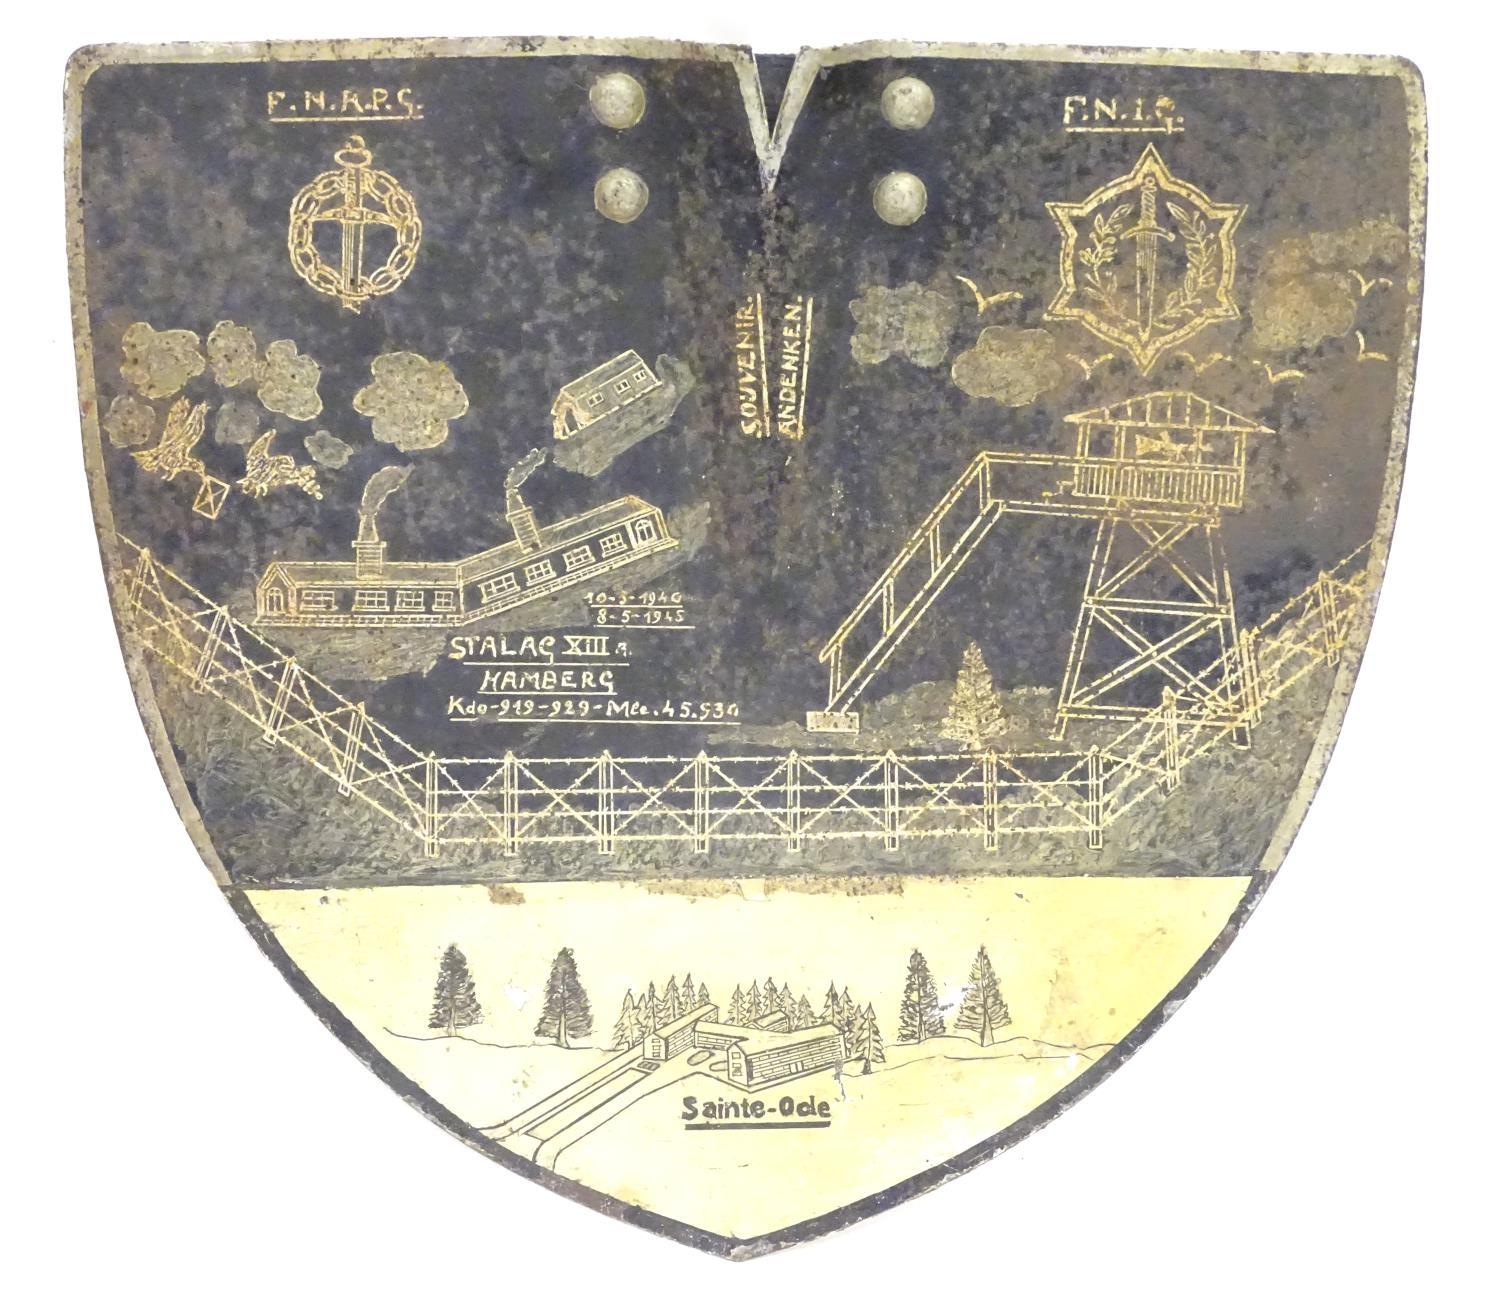 Militaria, Second World War / World War II / WW2: A decorated shovel blade, painted with the emblems